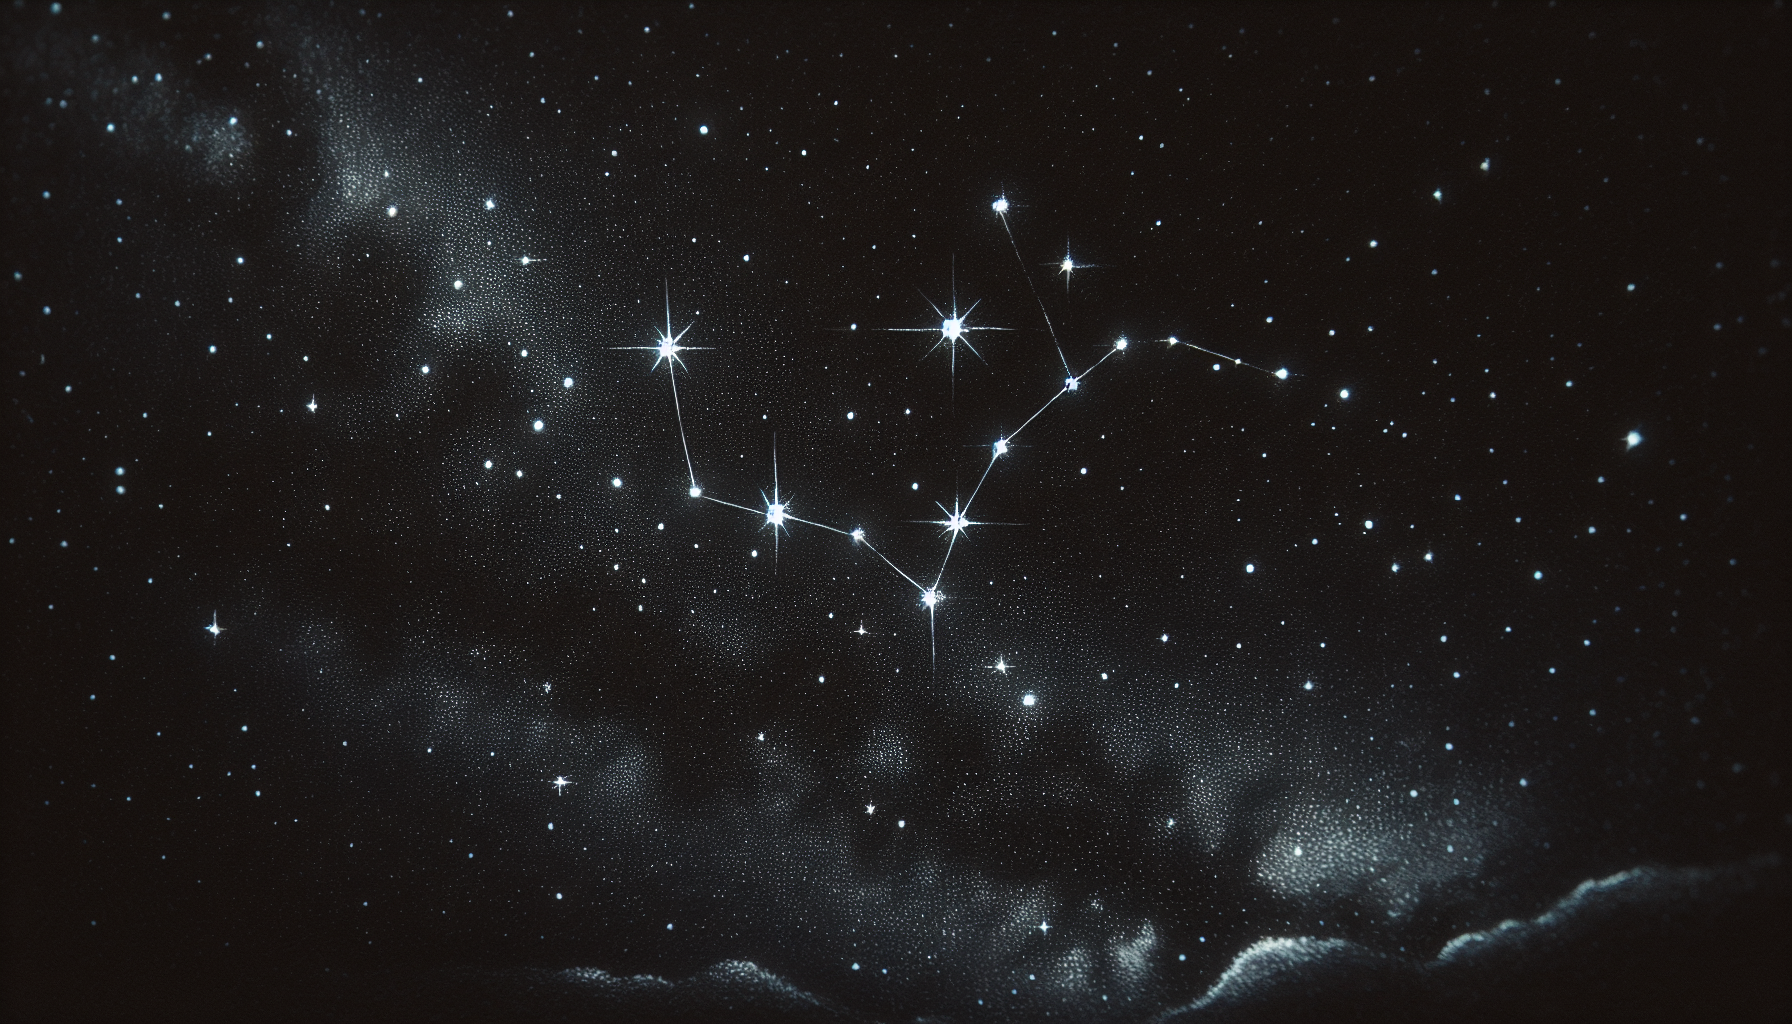 Illustration of the Little Dipper constellation in the night sky